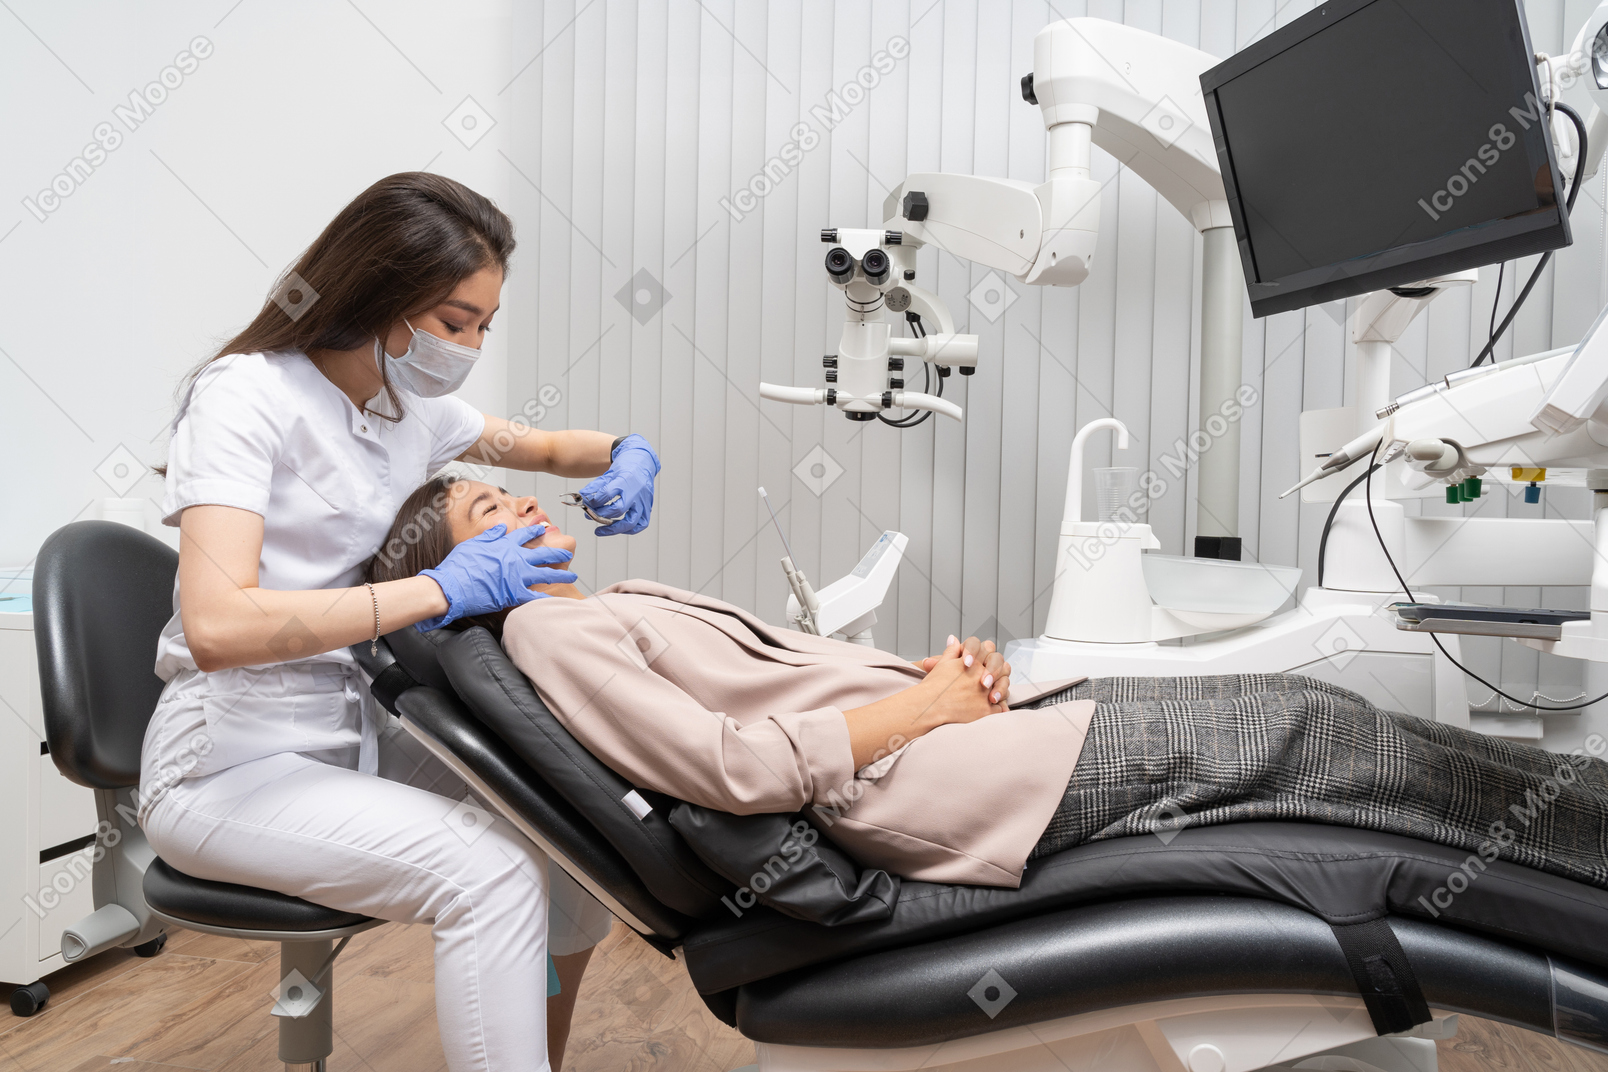 Full-length of a female dentist enjoying the process of examining her patient